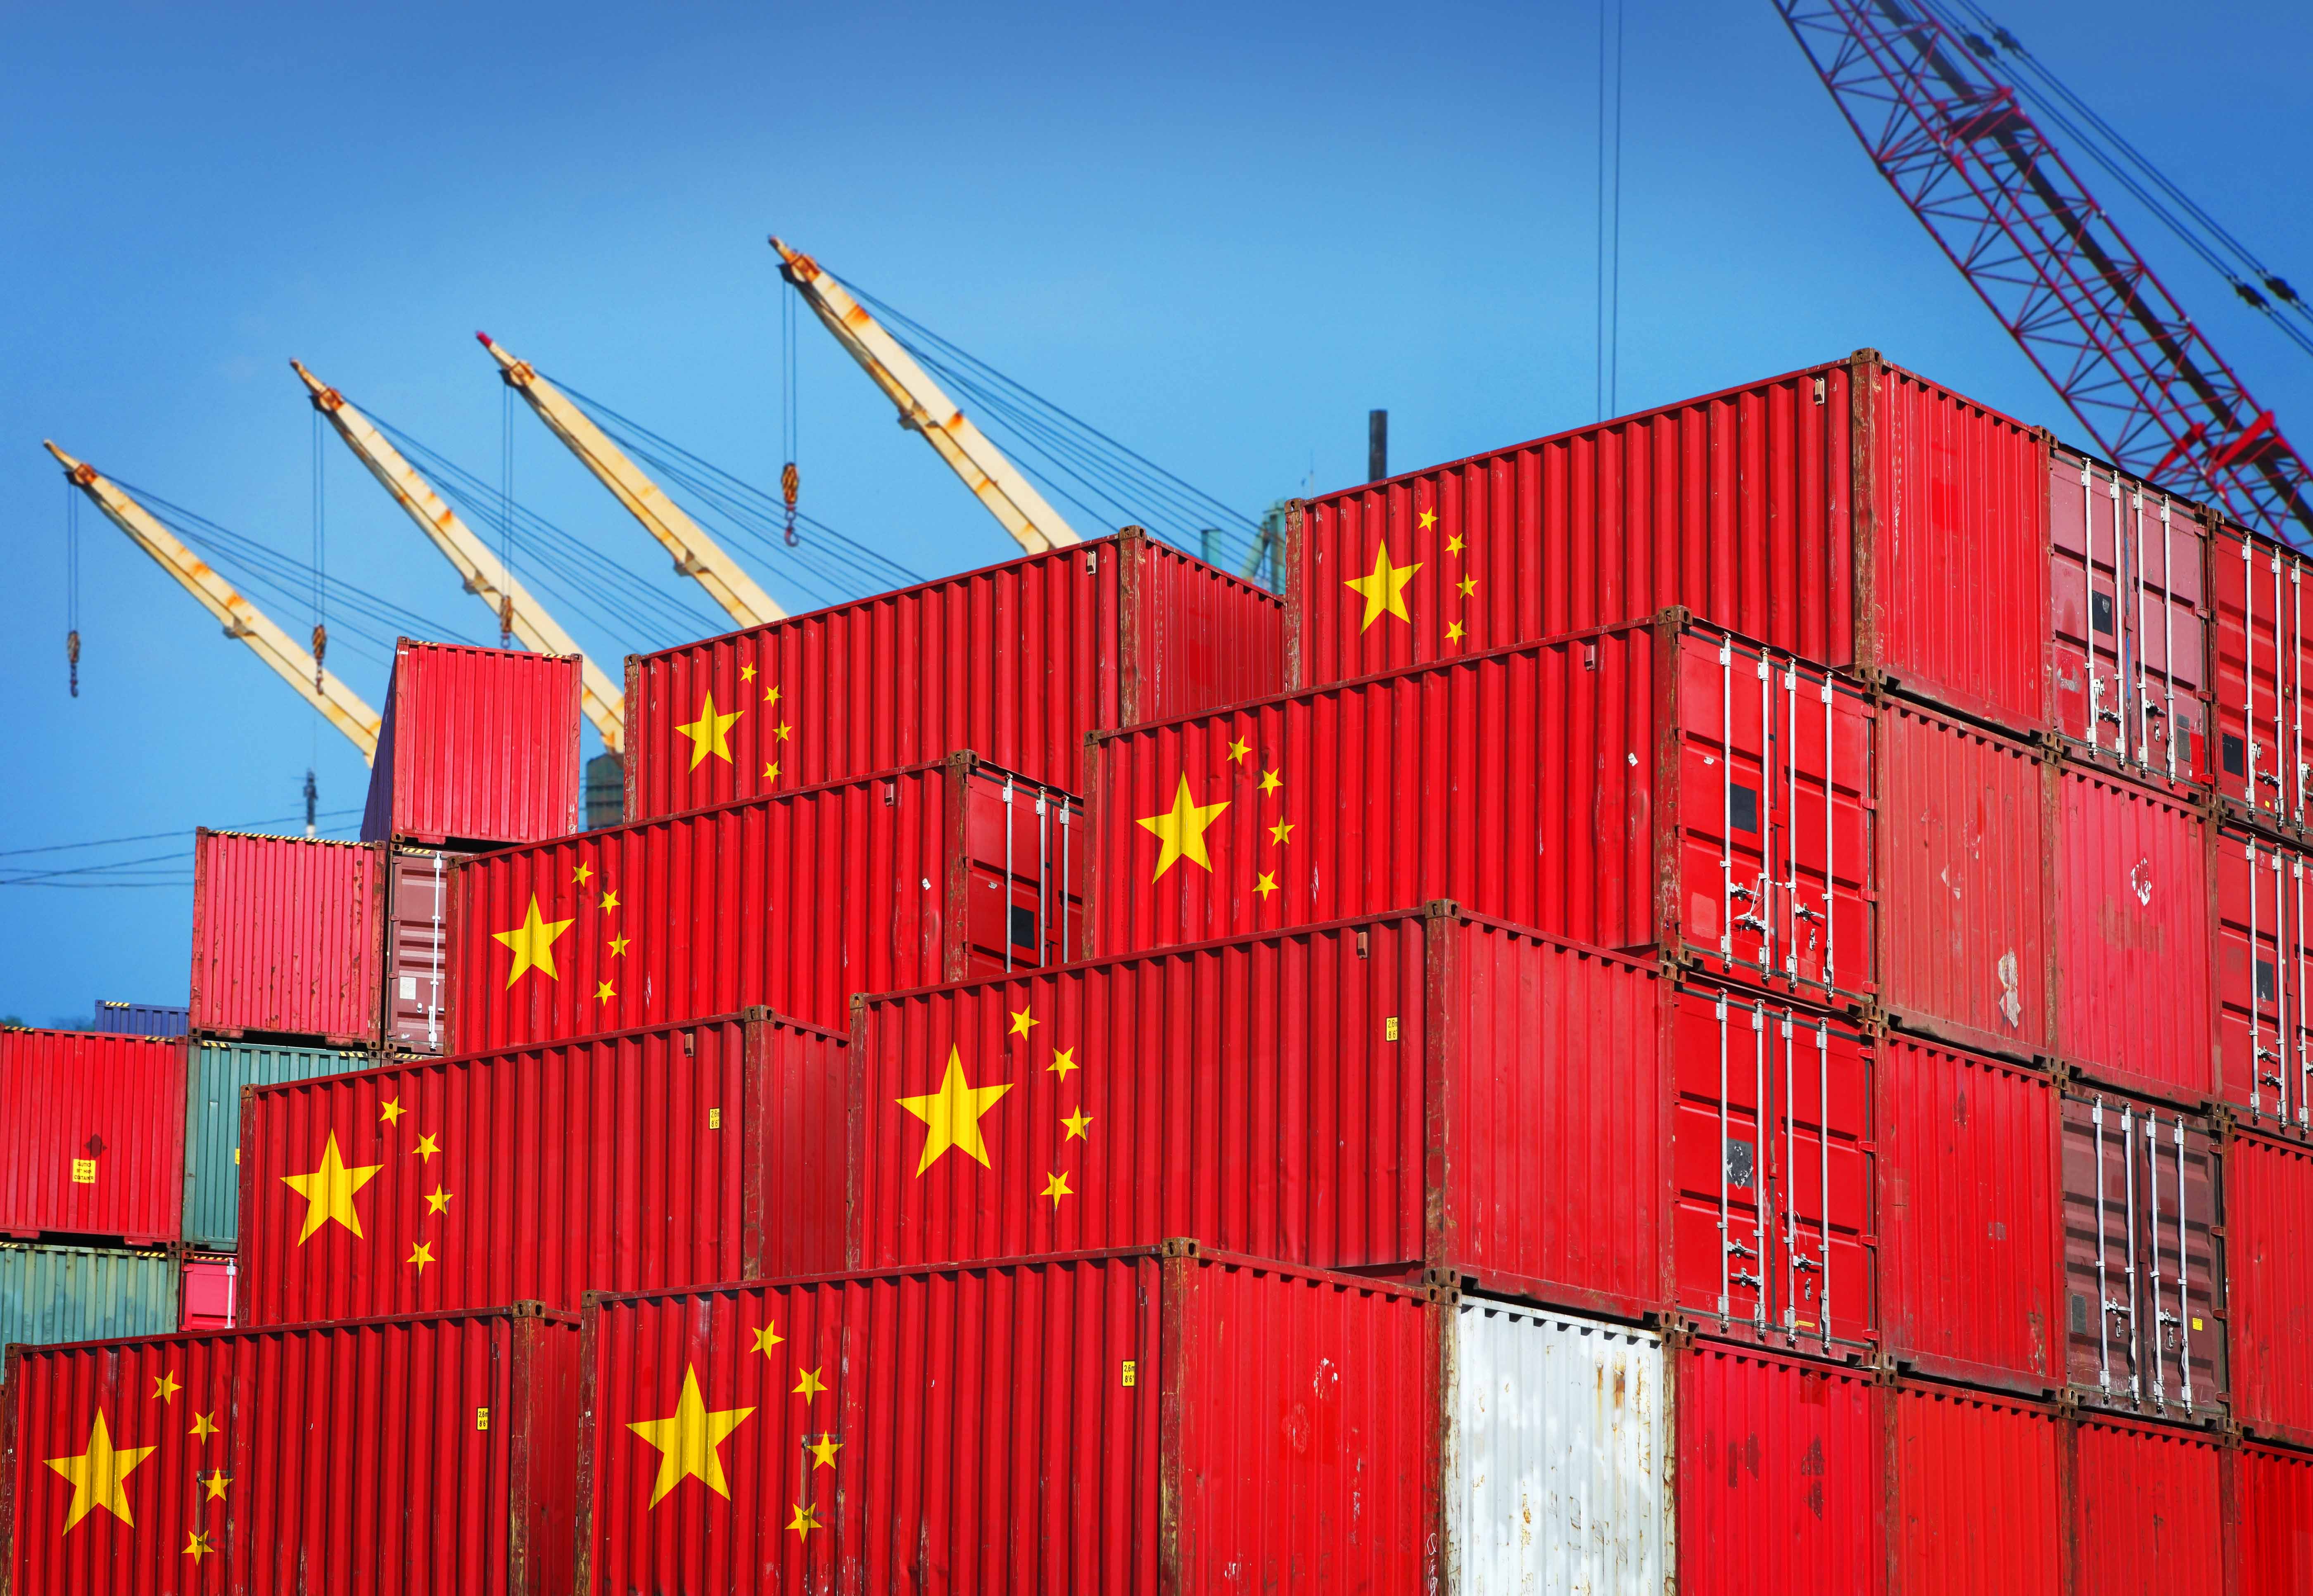 Is China leading the "free trade" world?